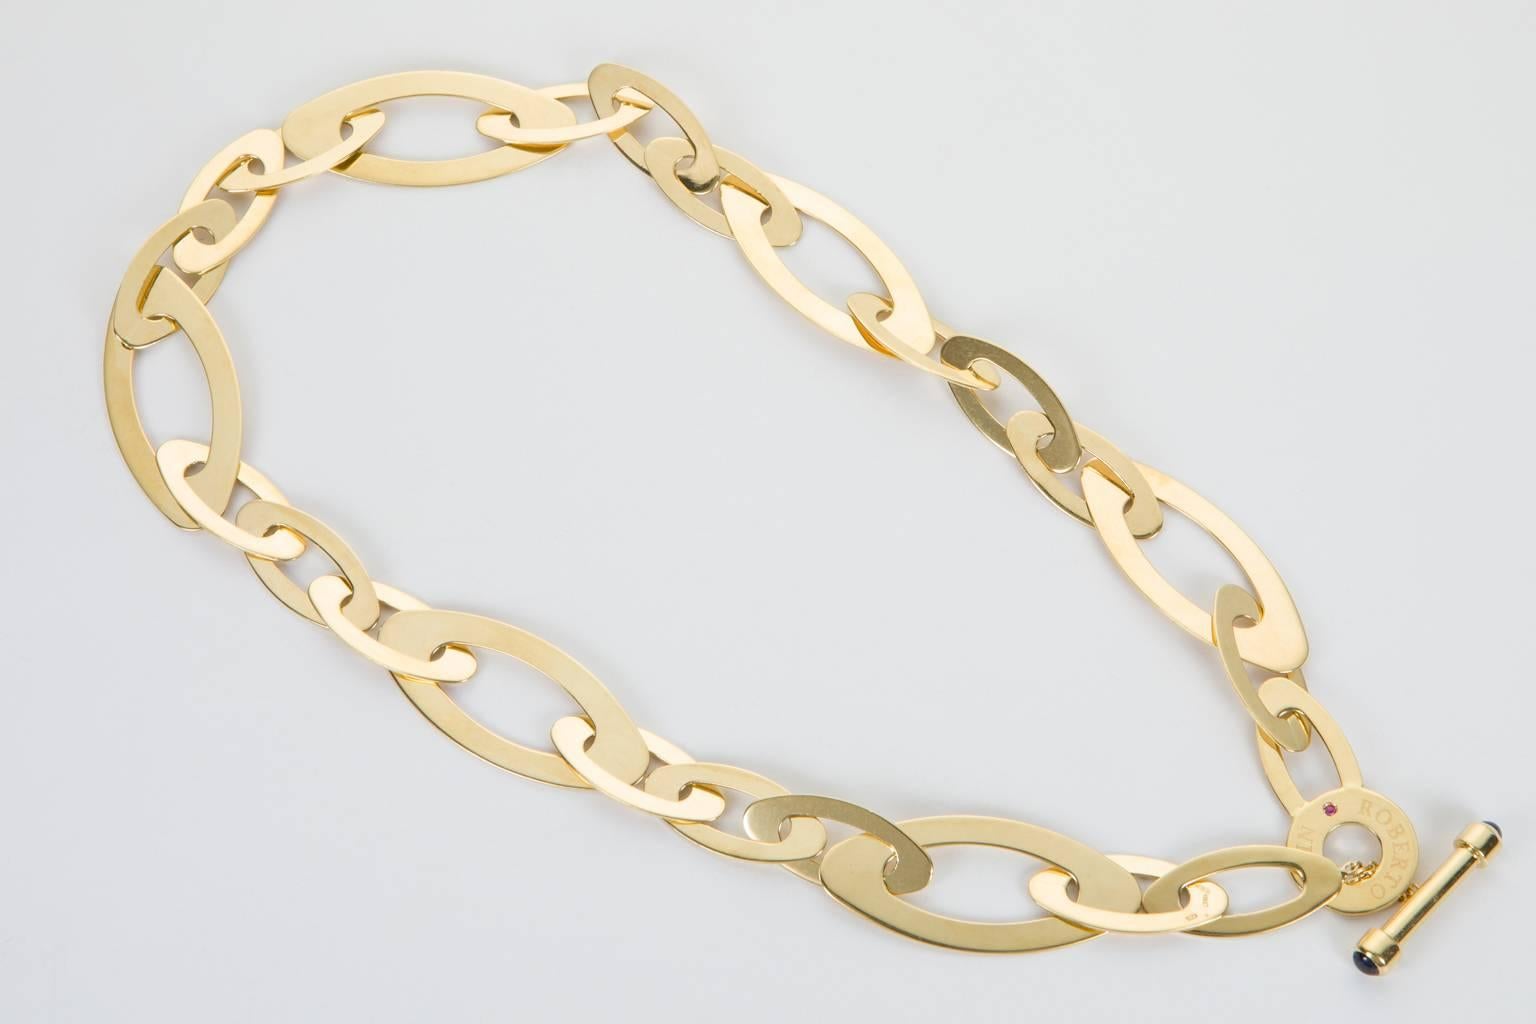 Sleek and stylish, this 18k Yellow Gold Roberto Coin necklace is such a beautiful statement. Large oval shaped flat links make for an interesting look on the neckline and with movement they have a certain shine. Signed Roberto Coin on the front